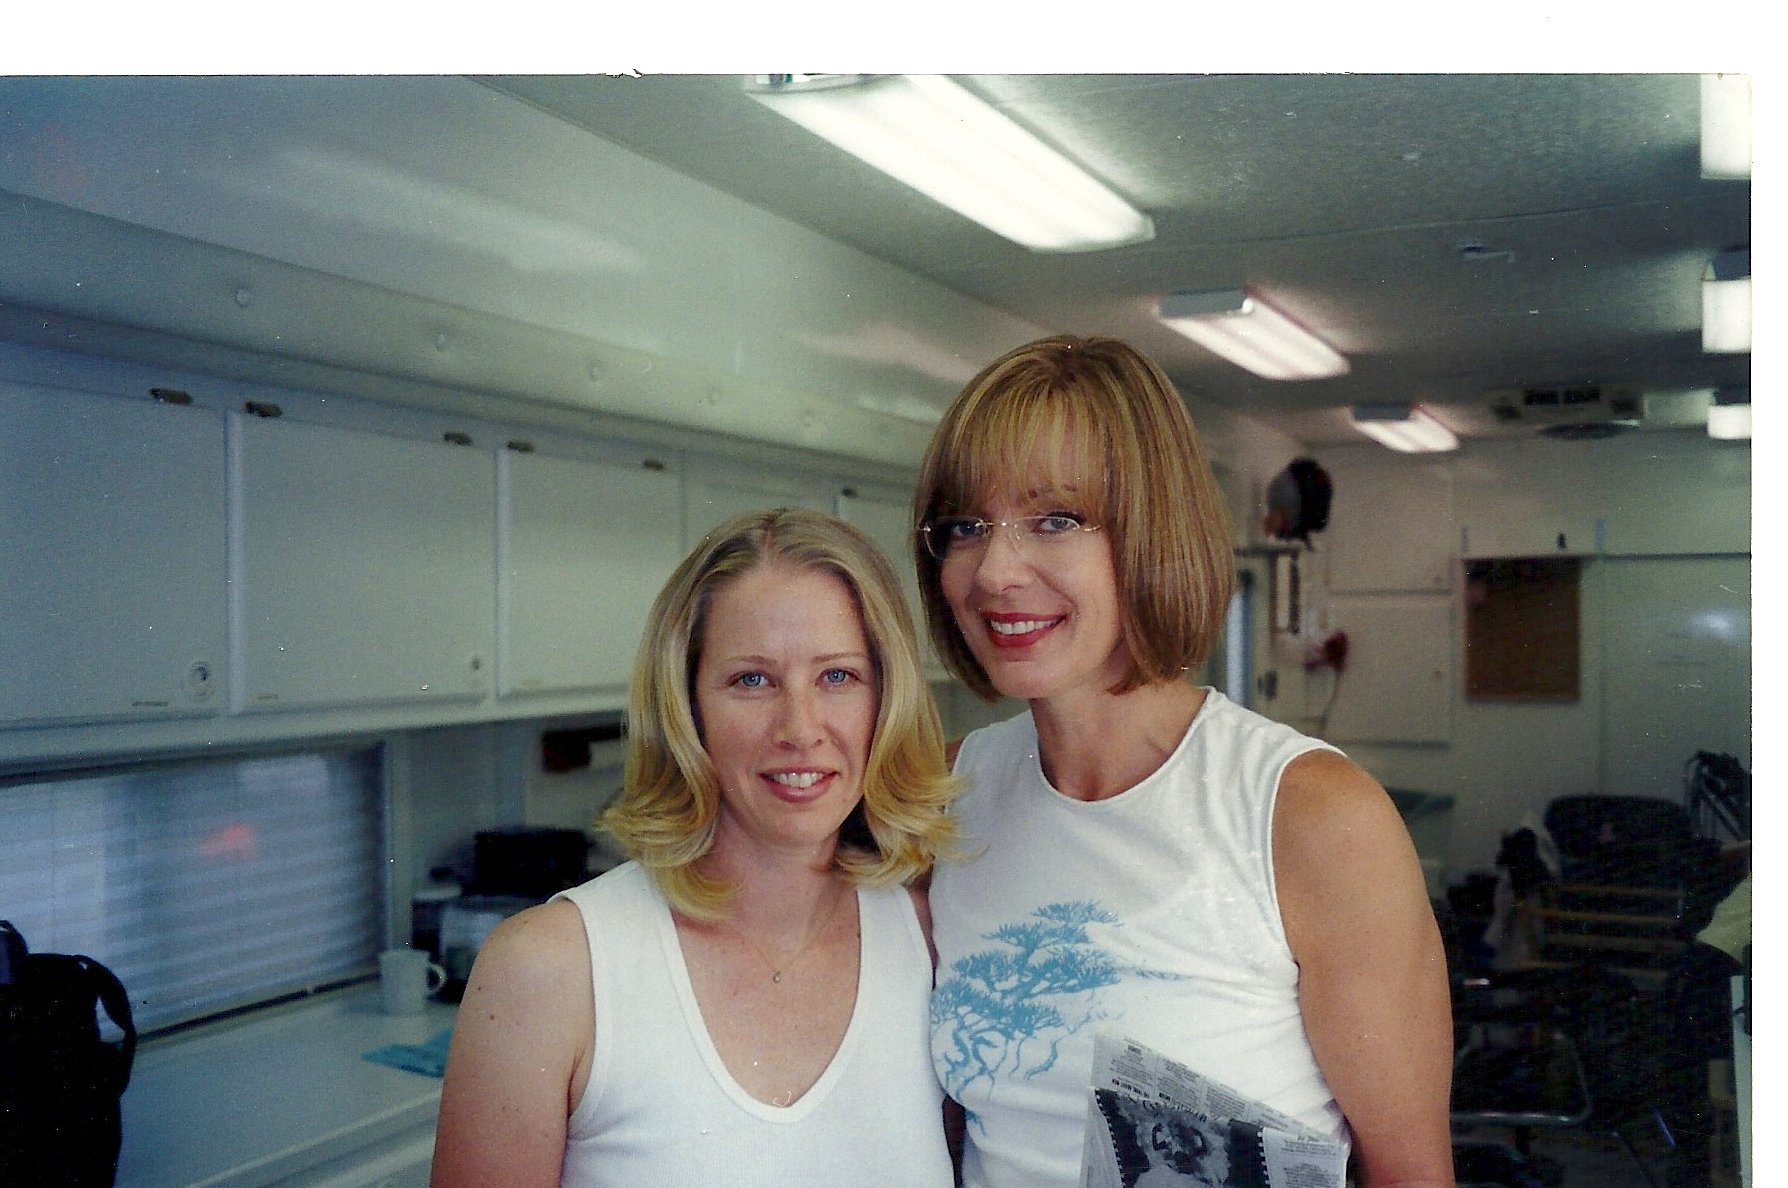 Rebecca Avery on The West Wing as Anna with Allison Janney